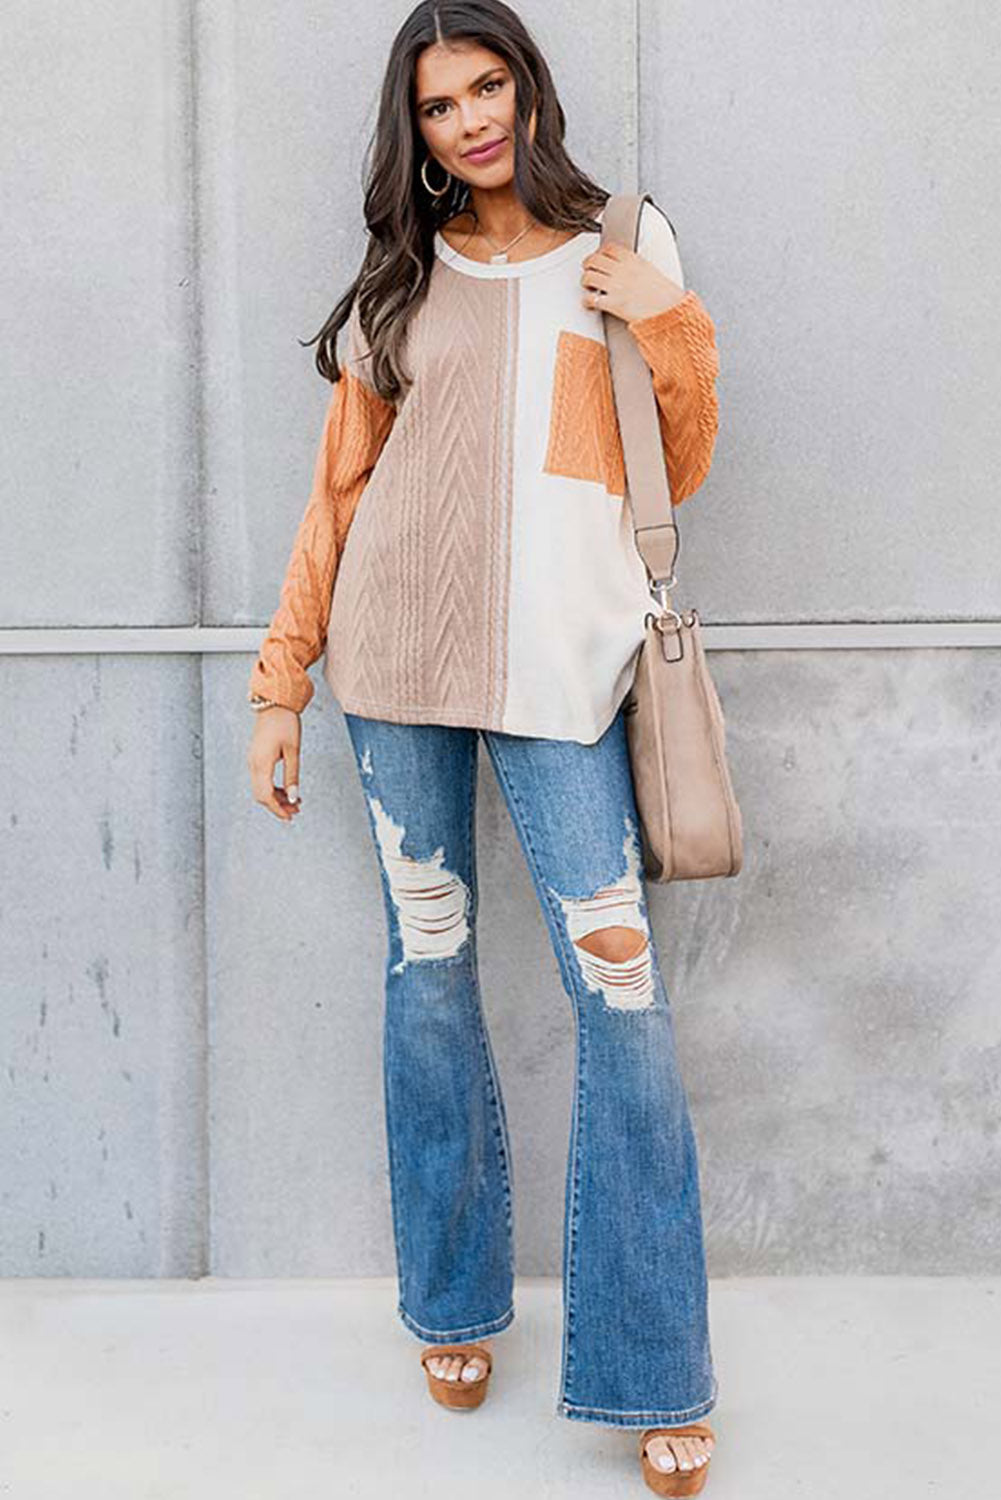 Peach Blossom Long Sleeve Colorblock Chest Pocket Textured Knit Top